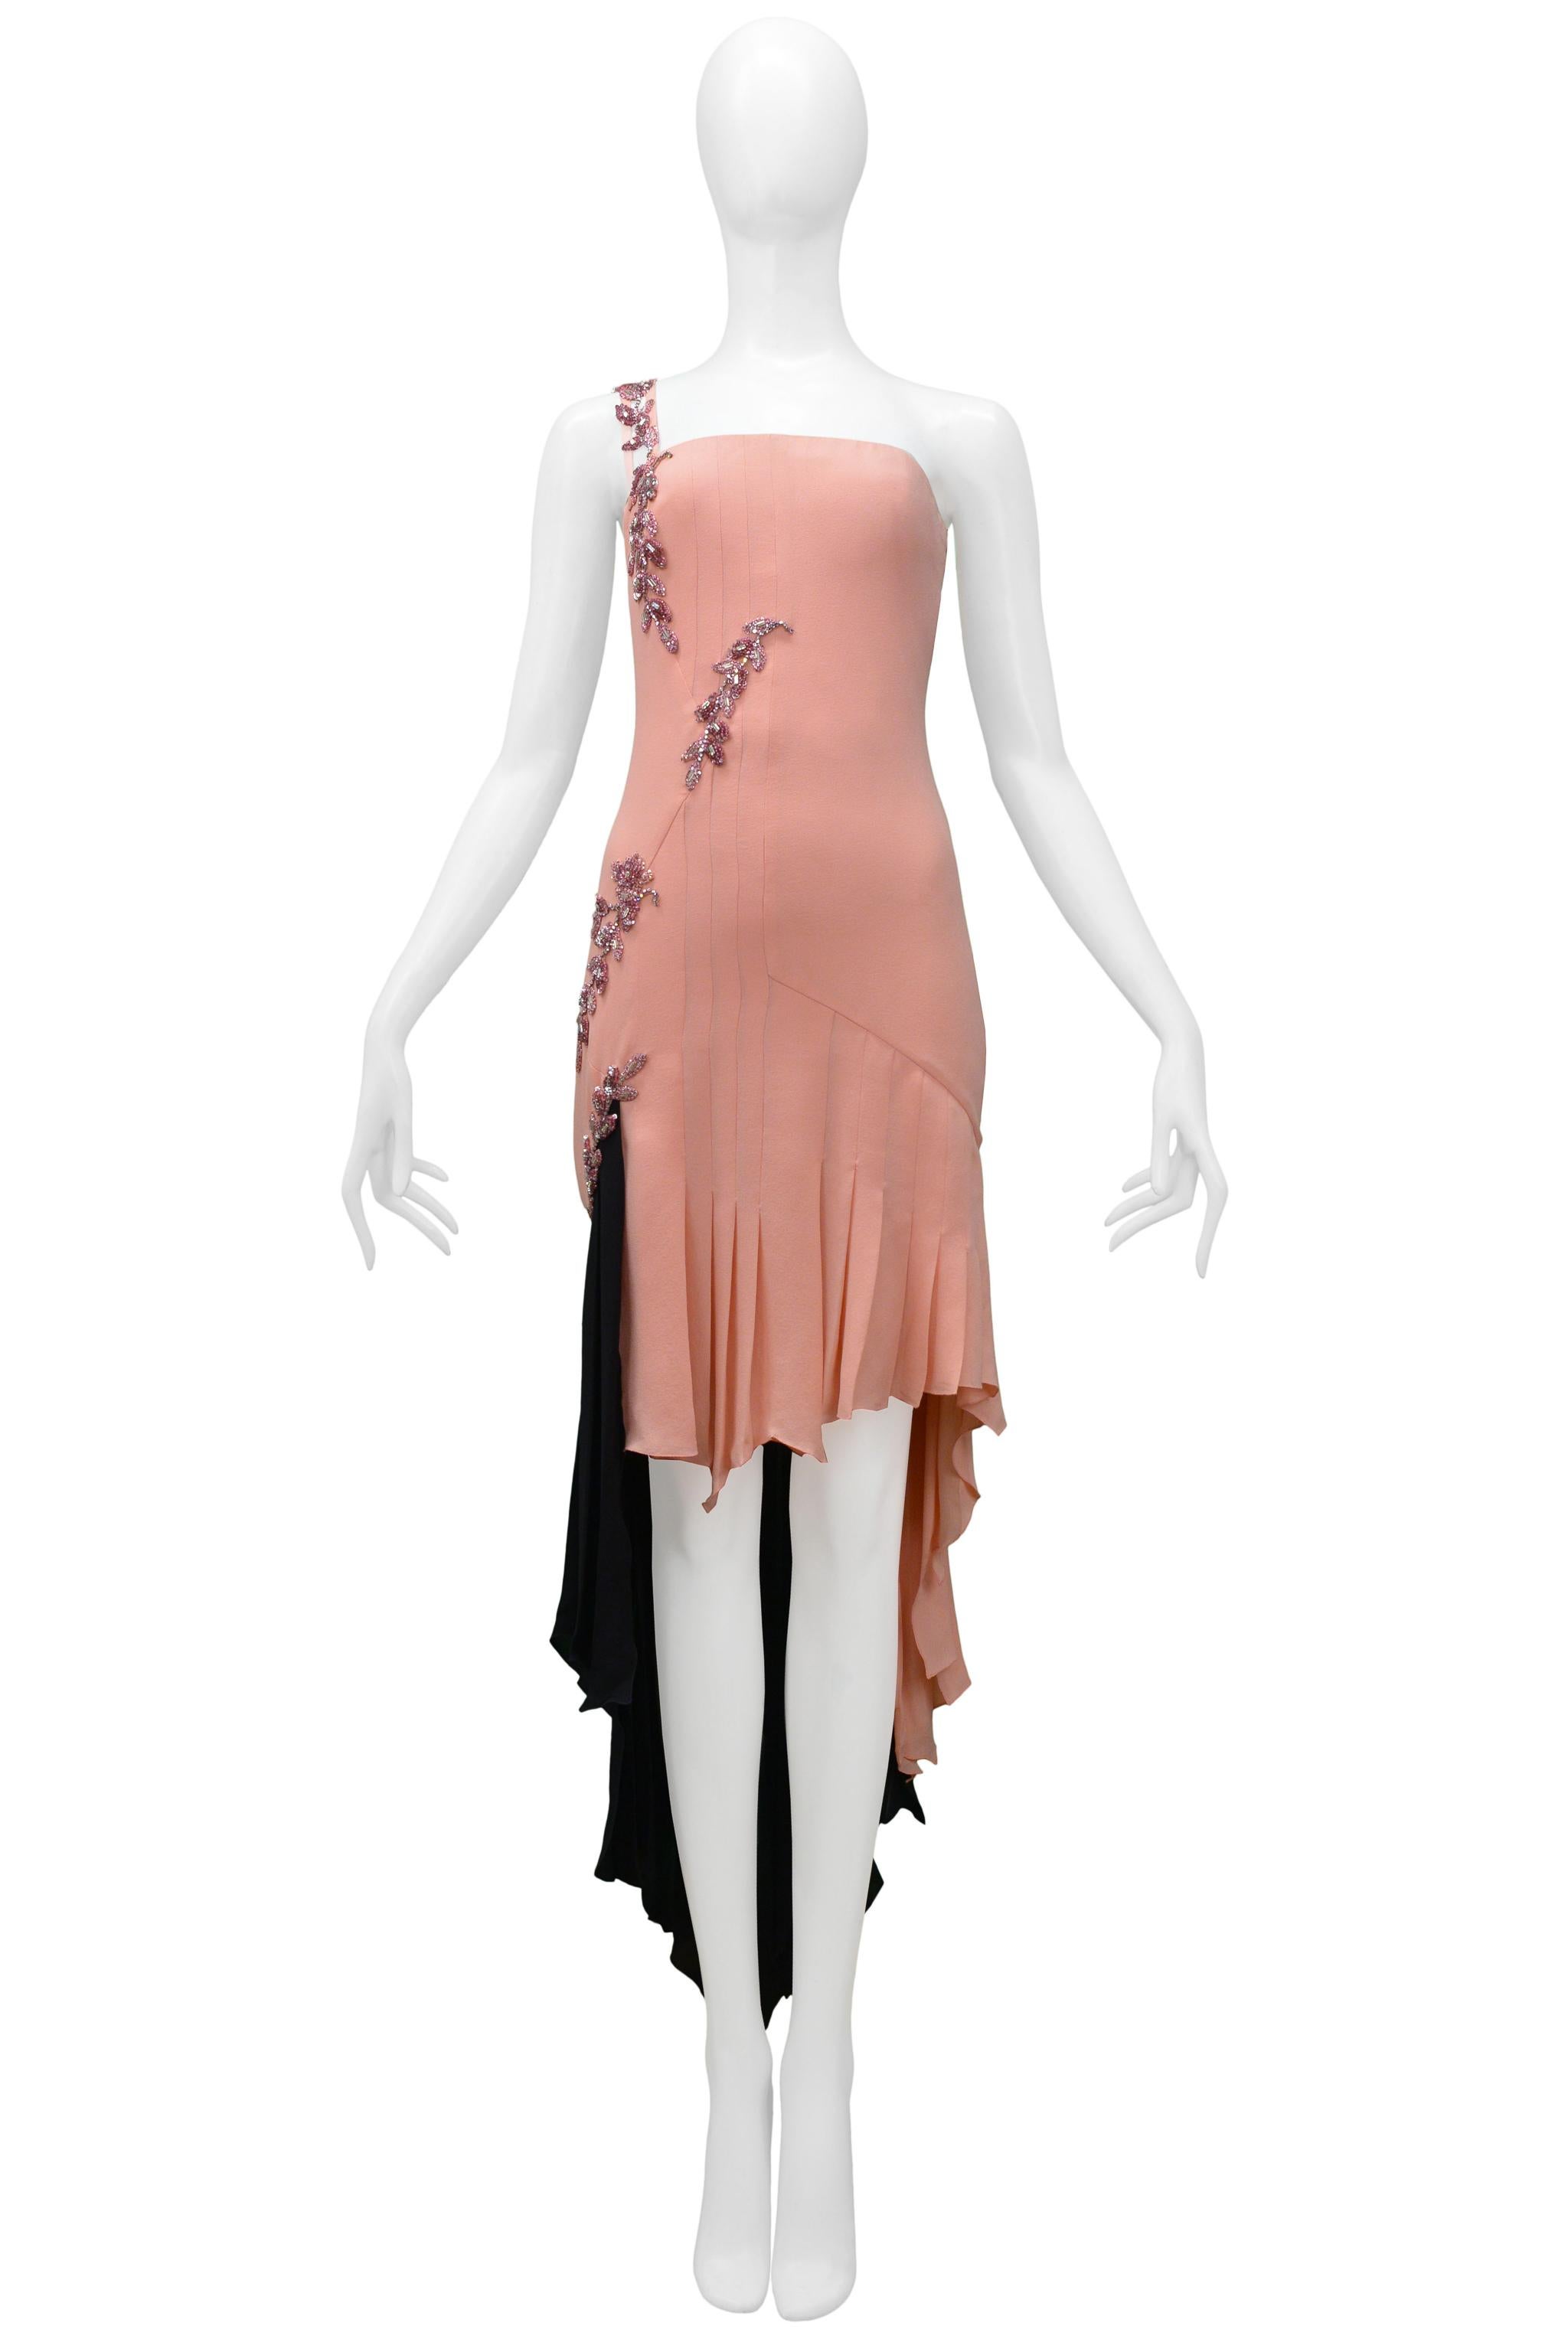 Resurrection Vintage is excited to offer a Versace Couture black and pink deconstructed cocktail dress featuring rhinestones and beading, a pleated skirt, an asymmetrical strap, and a high-low hemline. This dress has never been worn and comes with